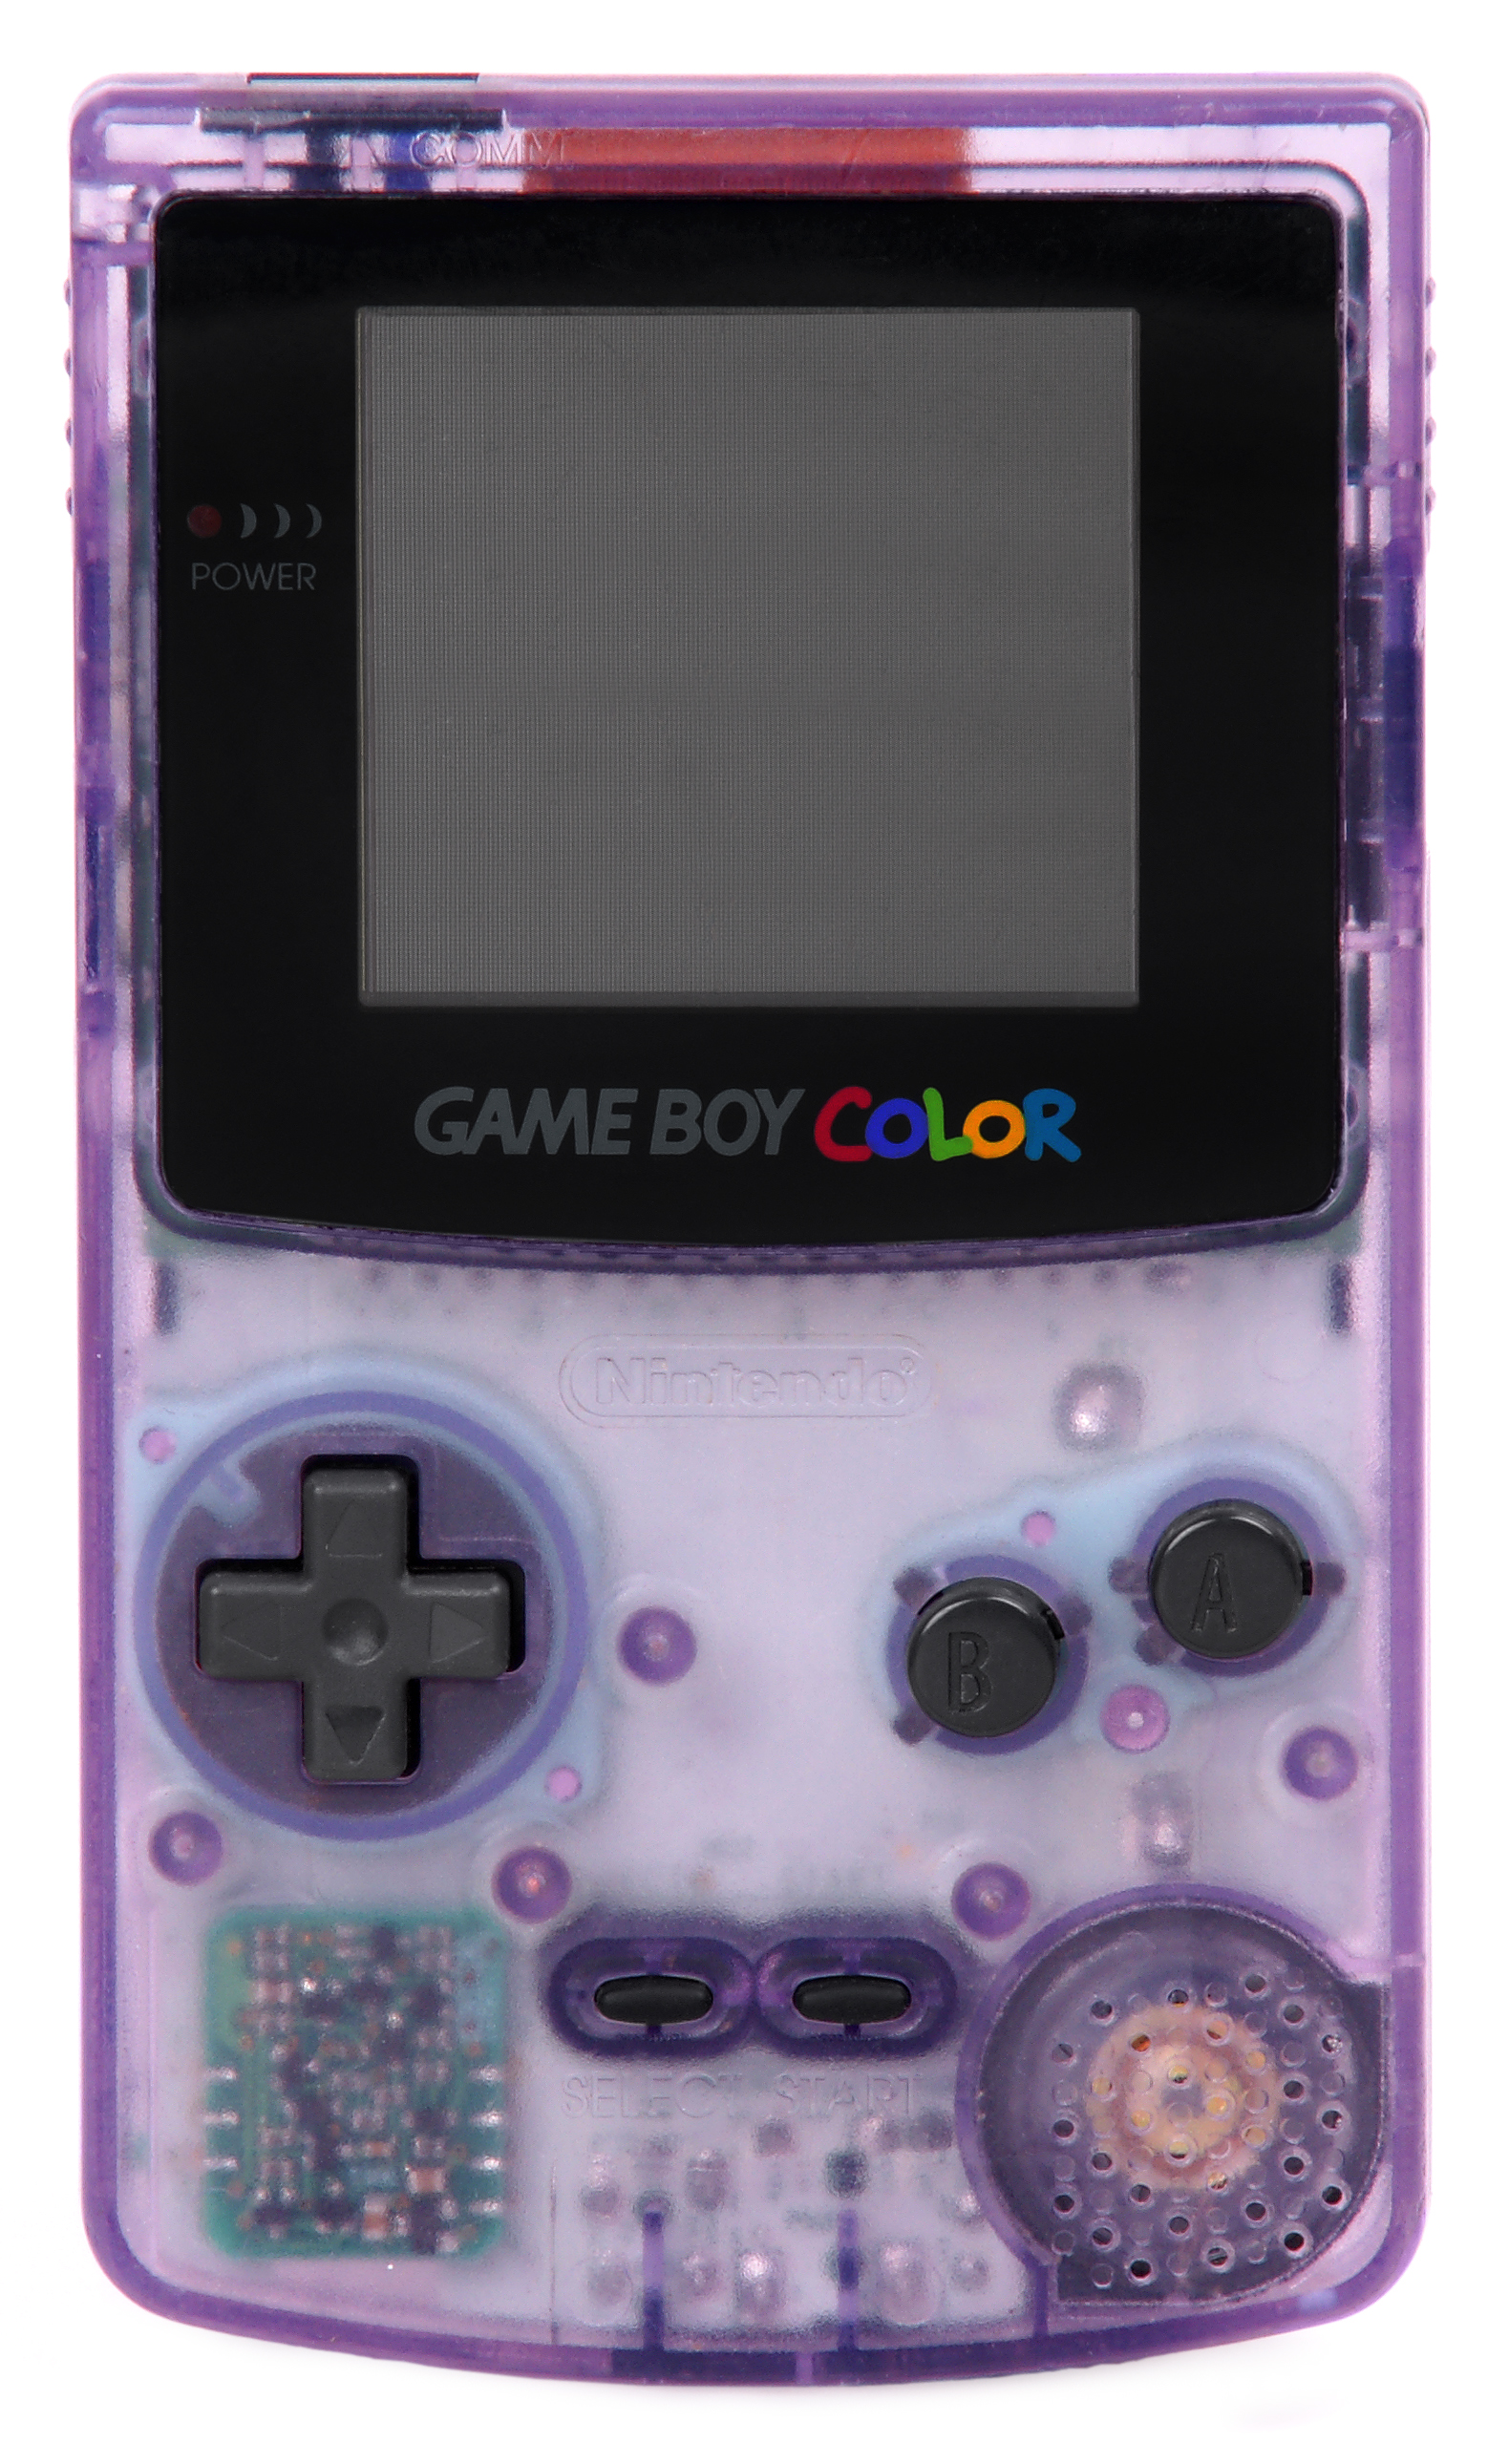 Game Boy Color - Simple English Wikipedia, the free encyclopedia